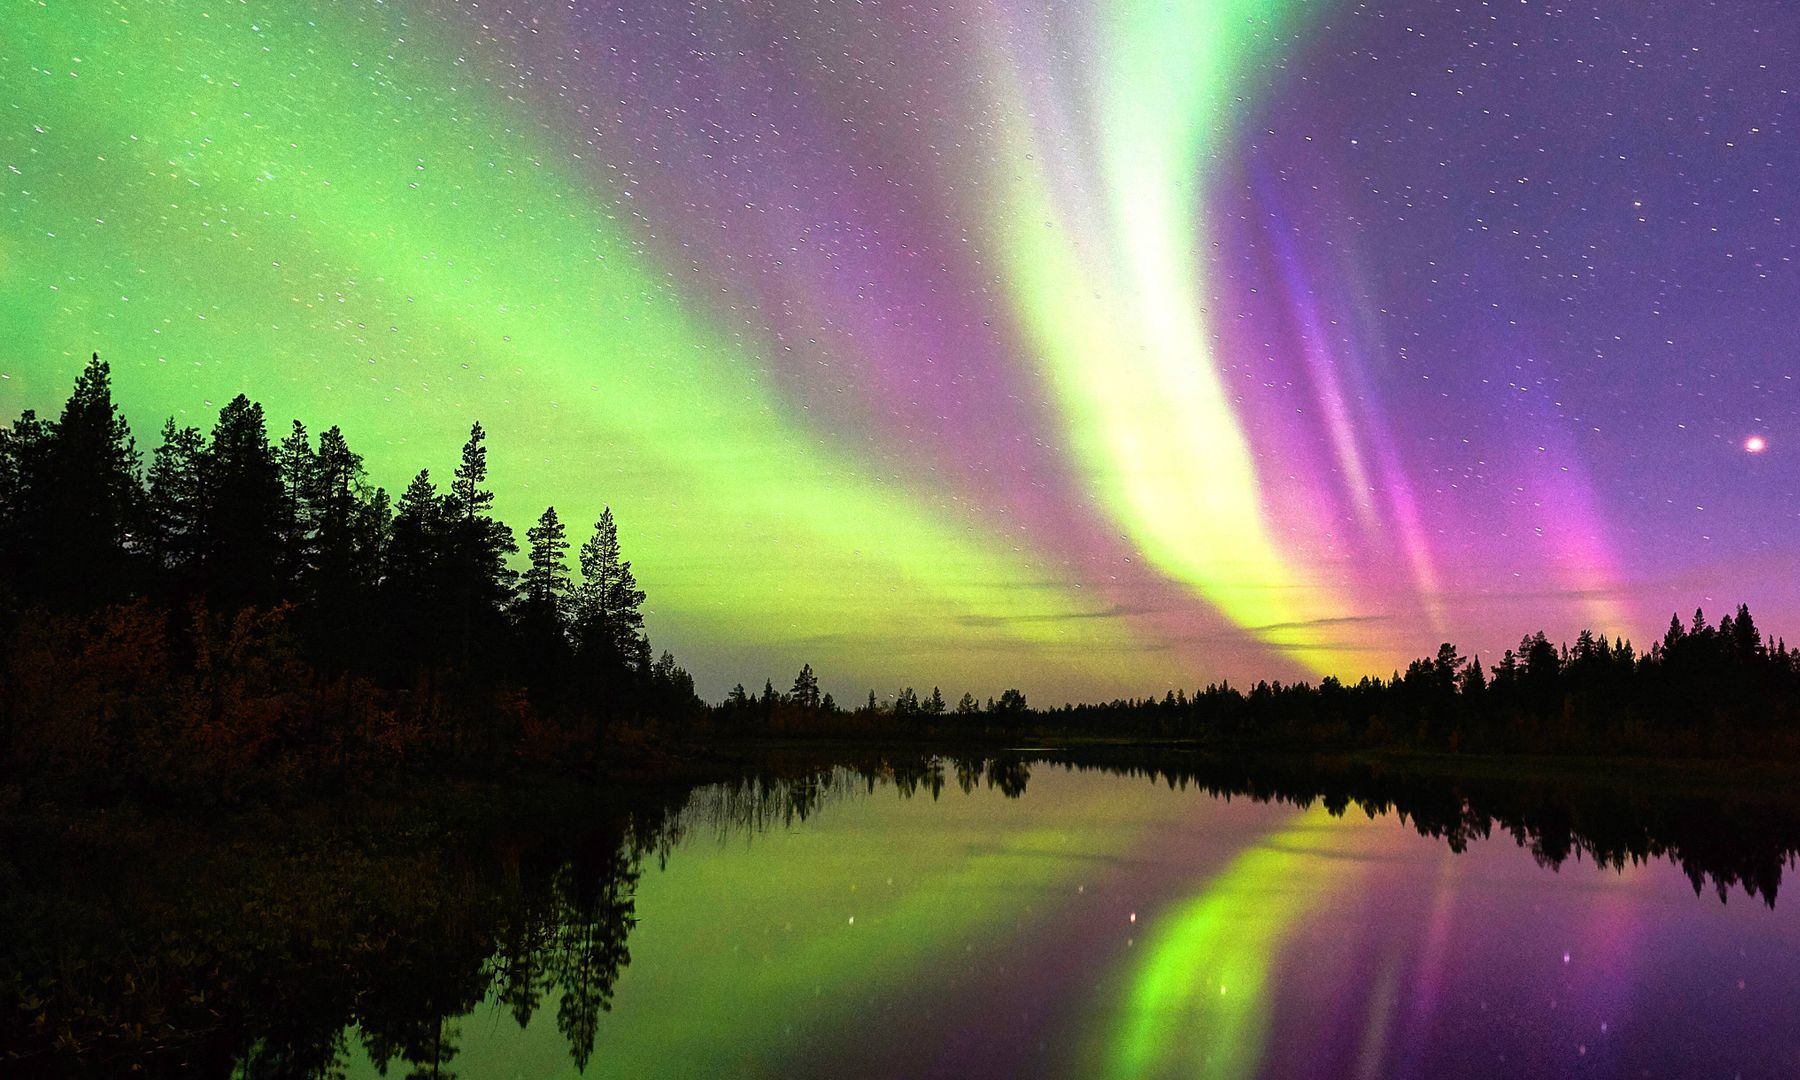 This is the best place to watch the Northern Lights